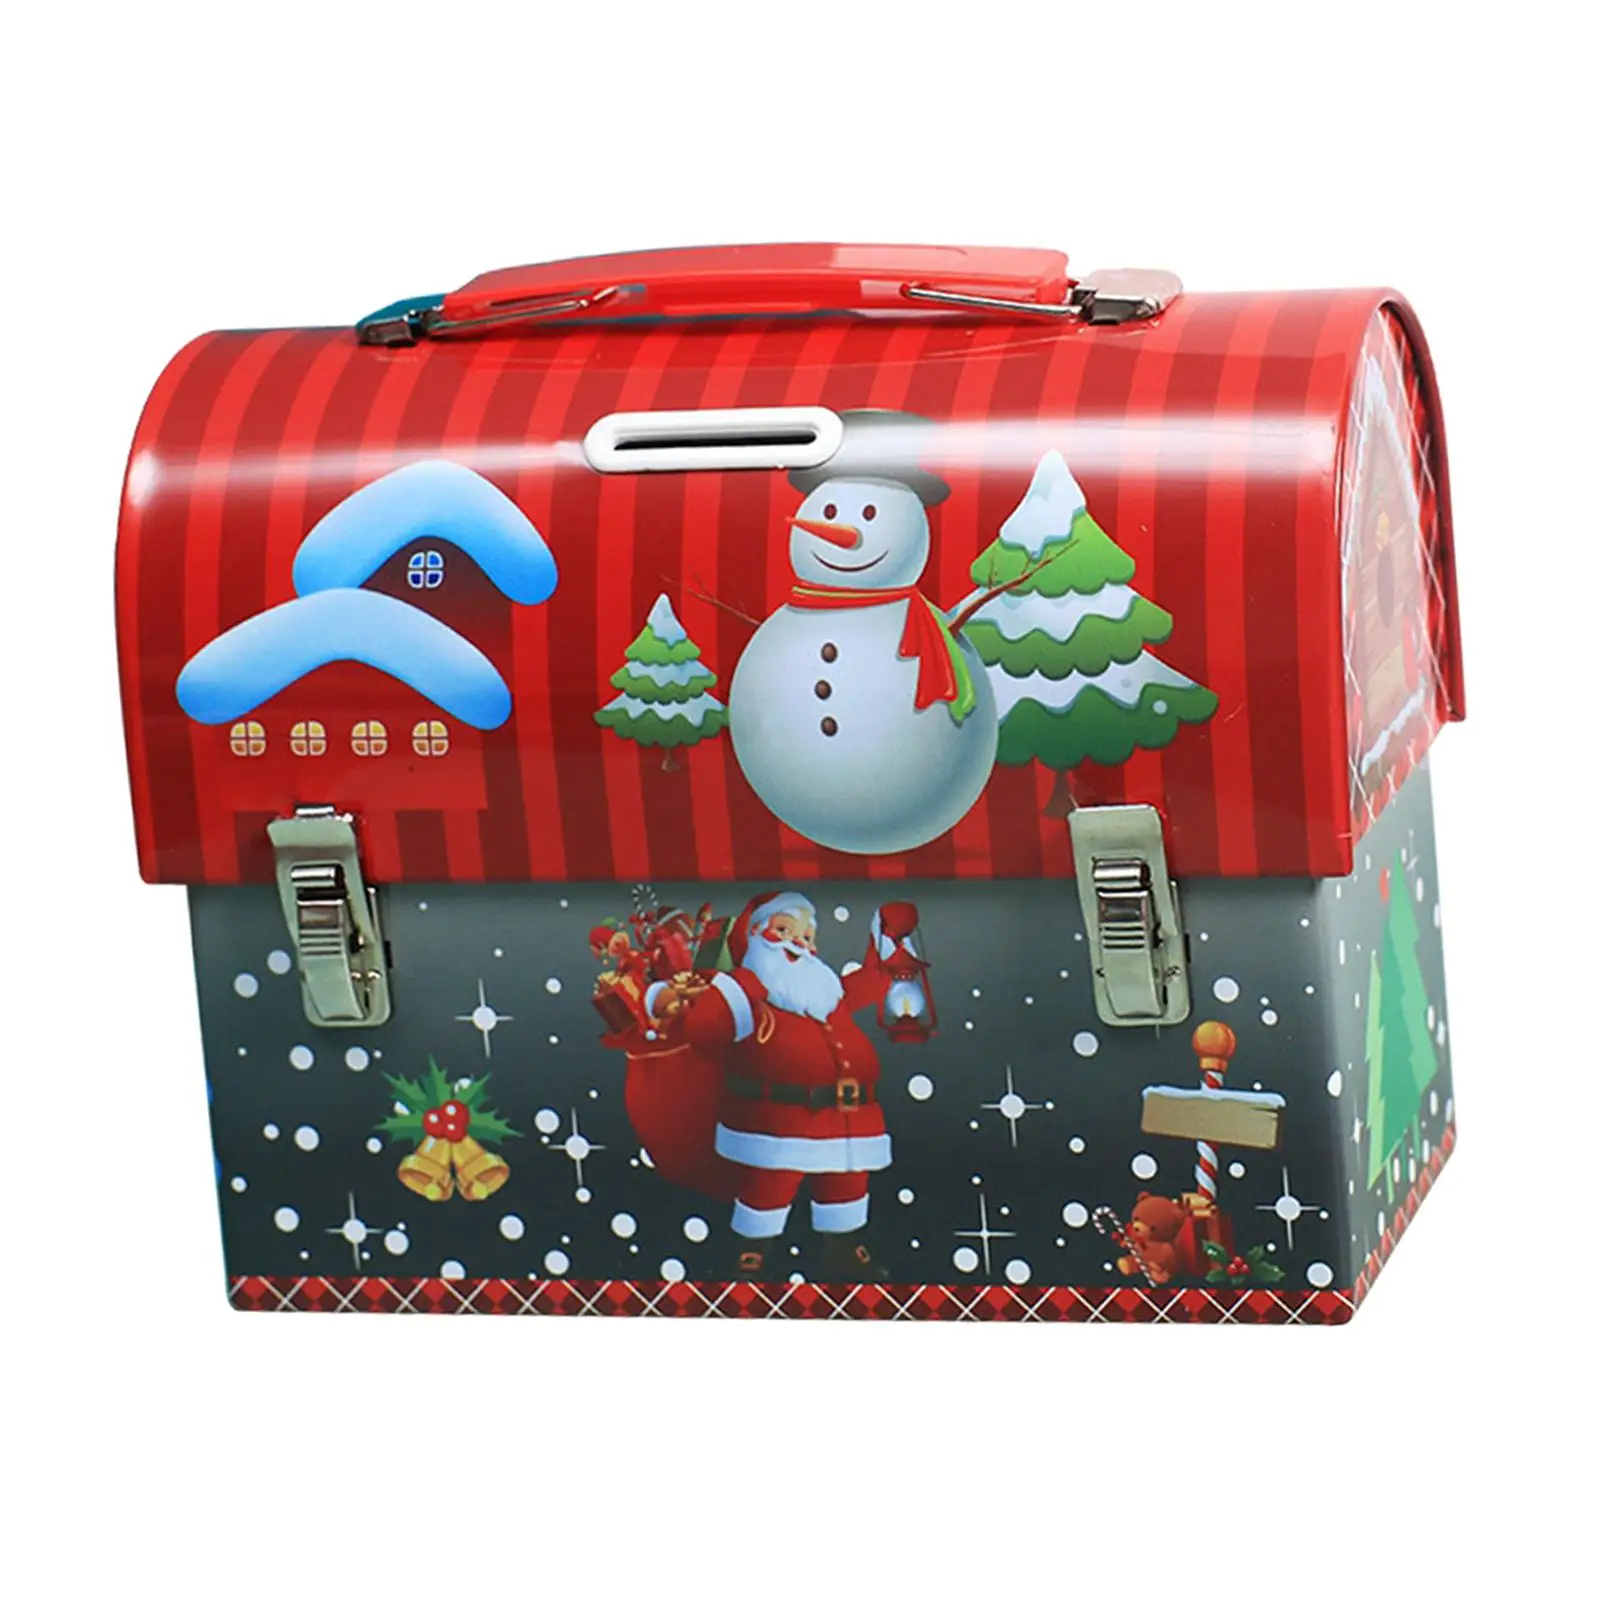 Christmas Cookie Tins Tinplate Candy Boxes Holiday Empty Tins Xmas Metal Gift Box for Xmas Party Favor Goody Treat